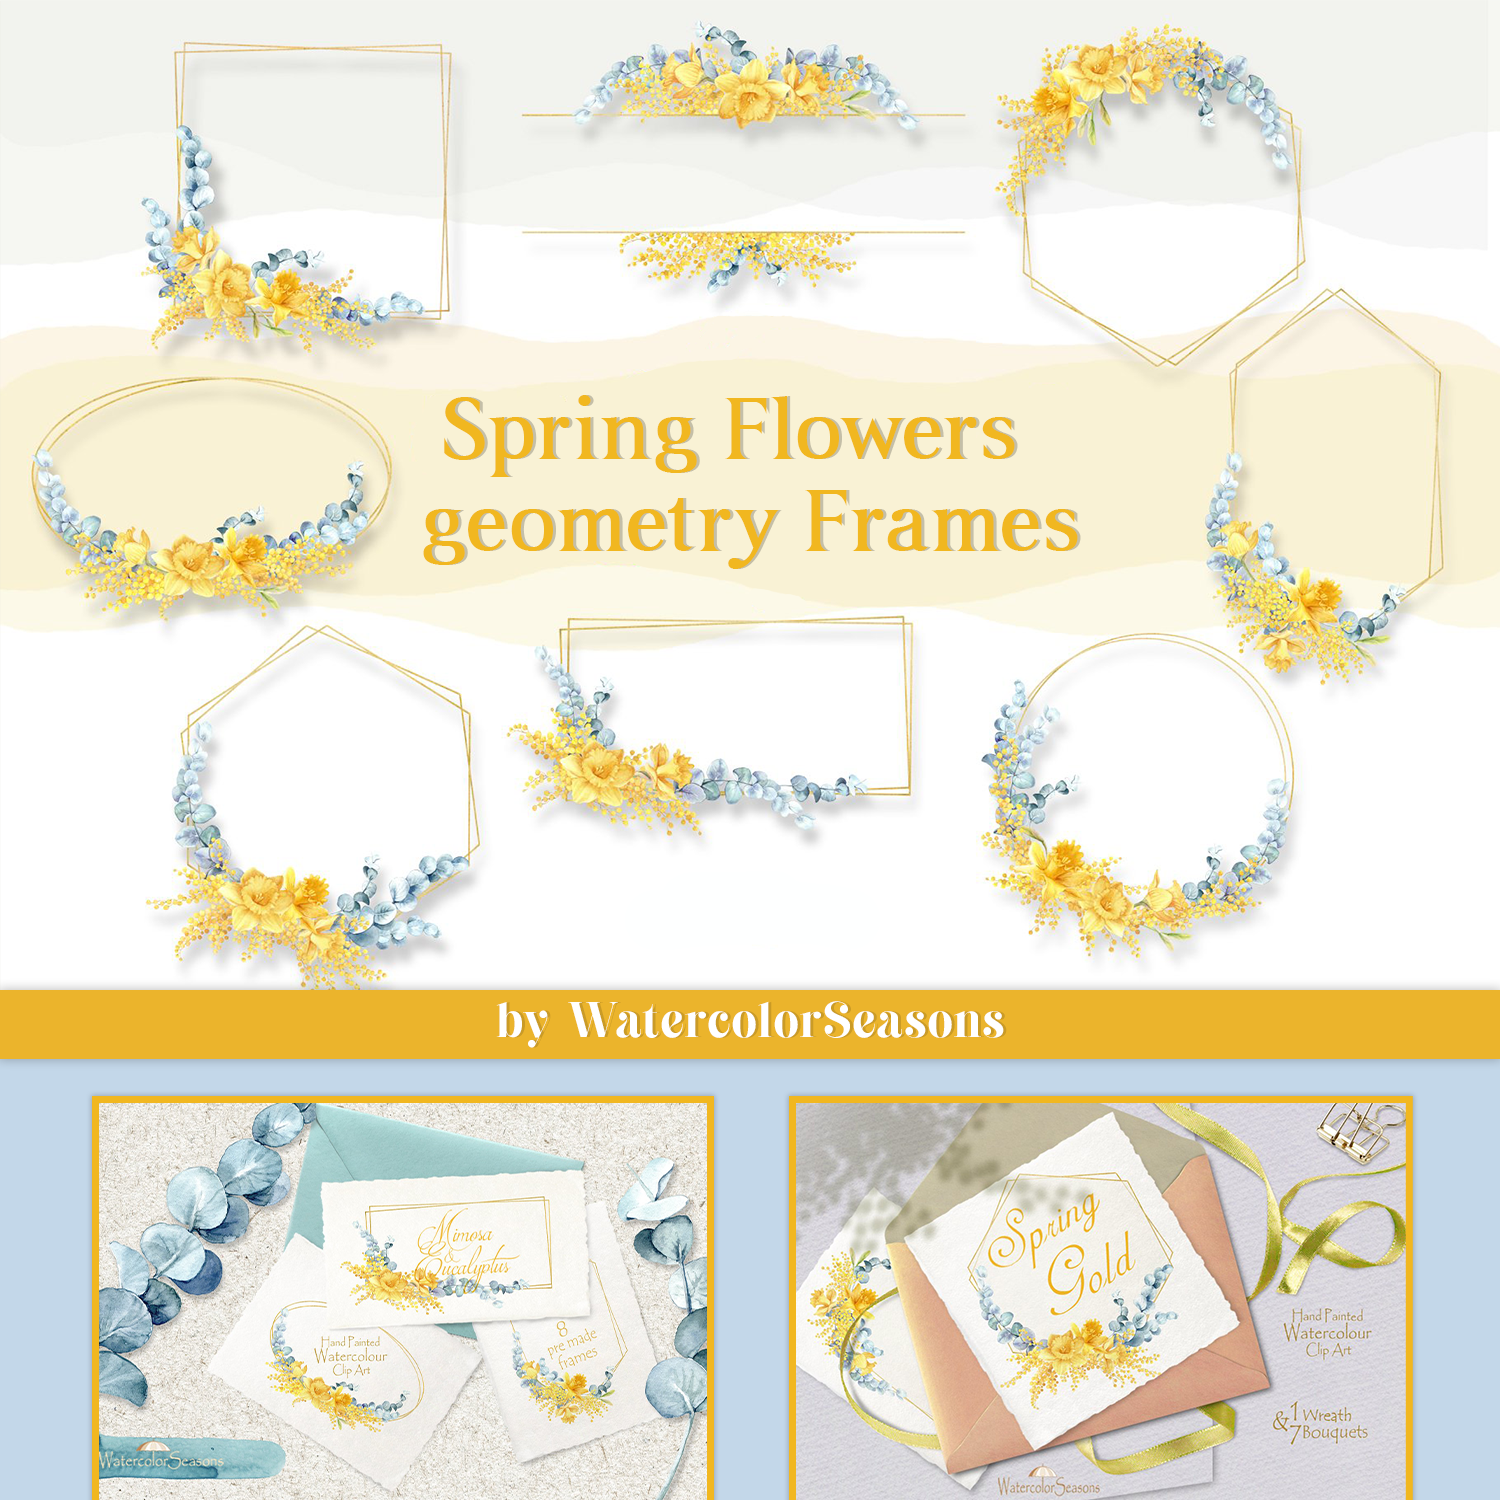 Spring flowers geometry frames preview.